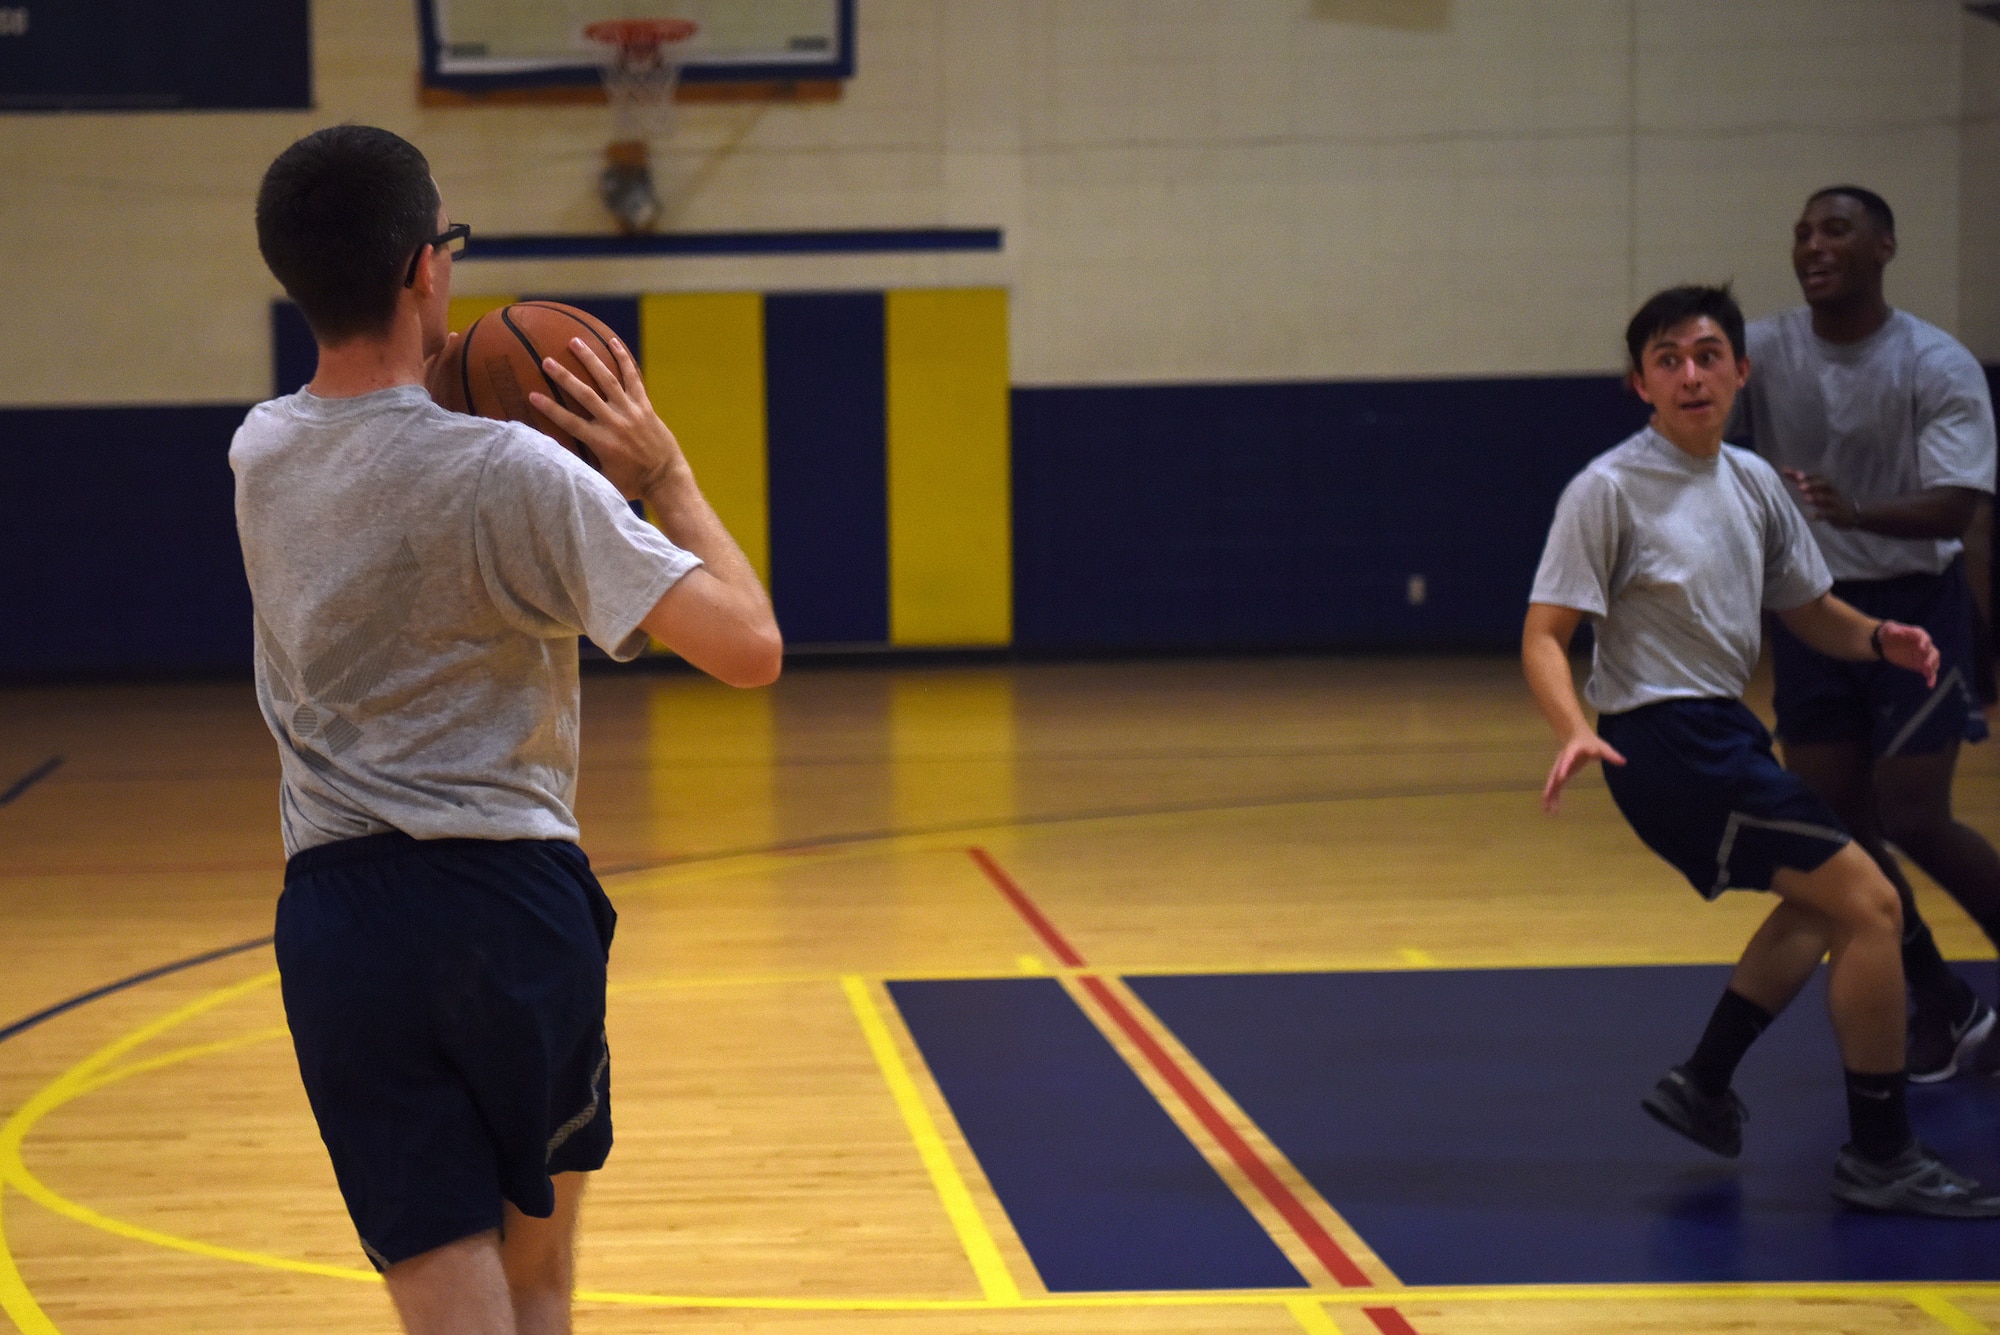 U.S. Air Force Airman Cade Hammerling, 336th Training Squadron client systems student, plays basketball inside the Blake Fitness Center on Keesler Air Force Base, Mississippi, Sept. 11, 2019. The 336th TRS revamped their Awaiting Further Instruction program and turned it into a multi-tracked program that prepares Airmen for life in the Air Force. The new program incorporated additional time for group physical training which focuses on teamwork. (U.S. Air Force photo by Senior Airman Suzie Plotnikov)